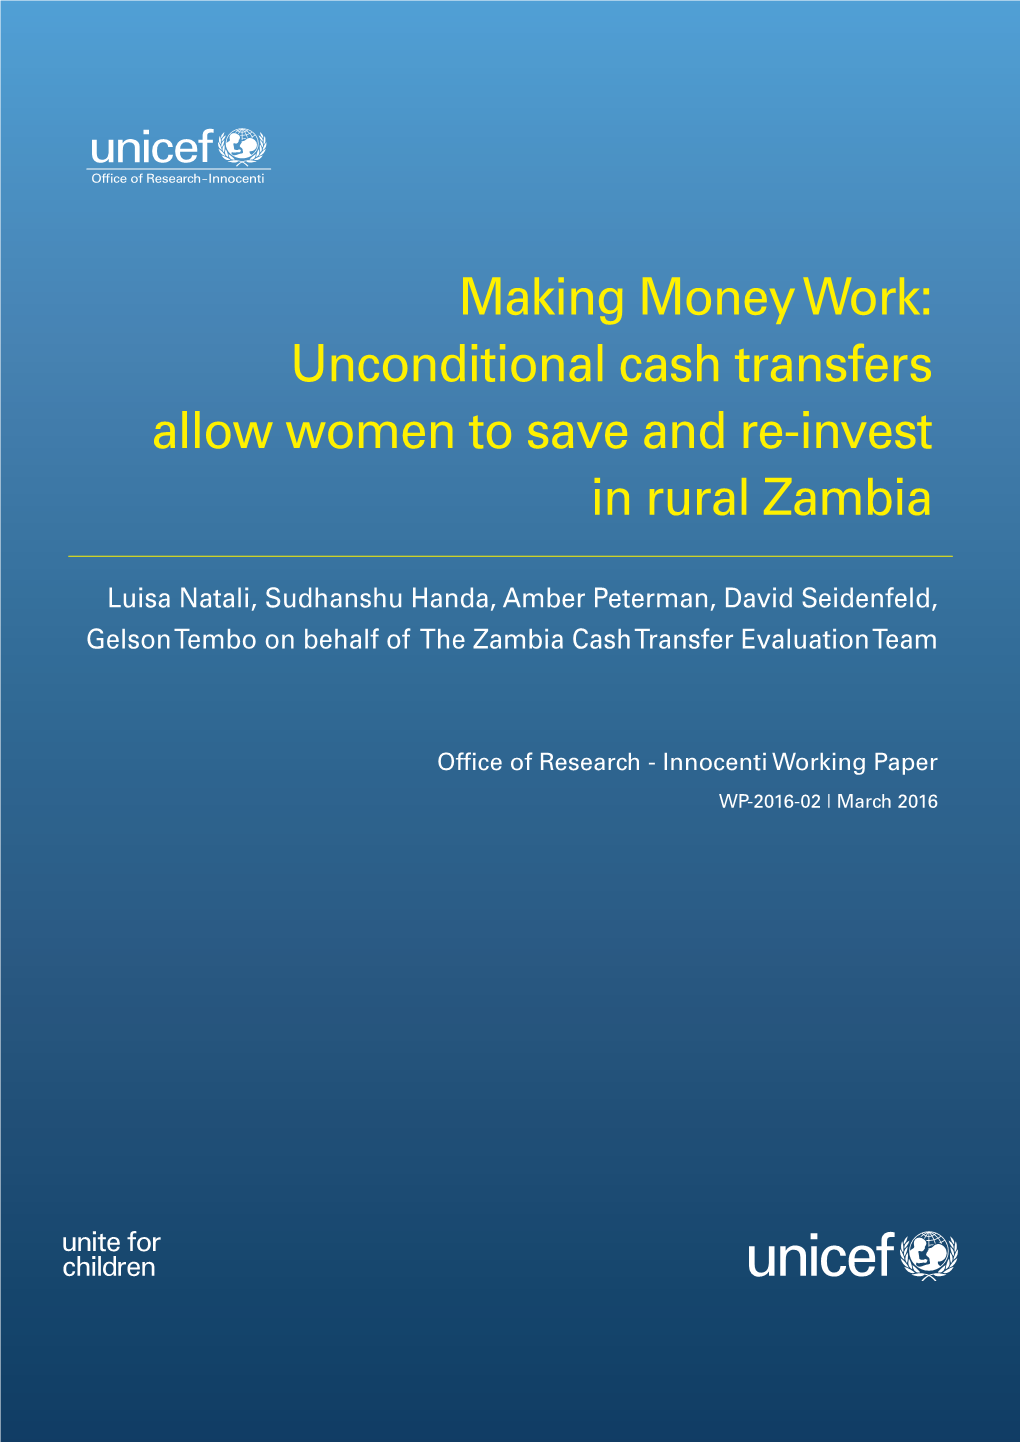 Making Money Work: Unconditional Cash Transfers Allow Women to Save and Re-Invest in Rural Zambia